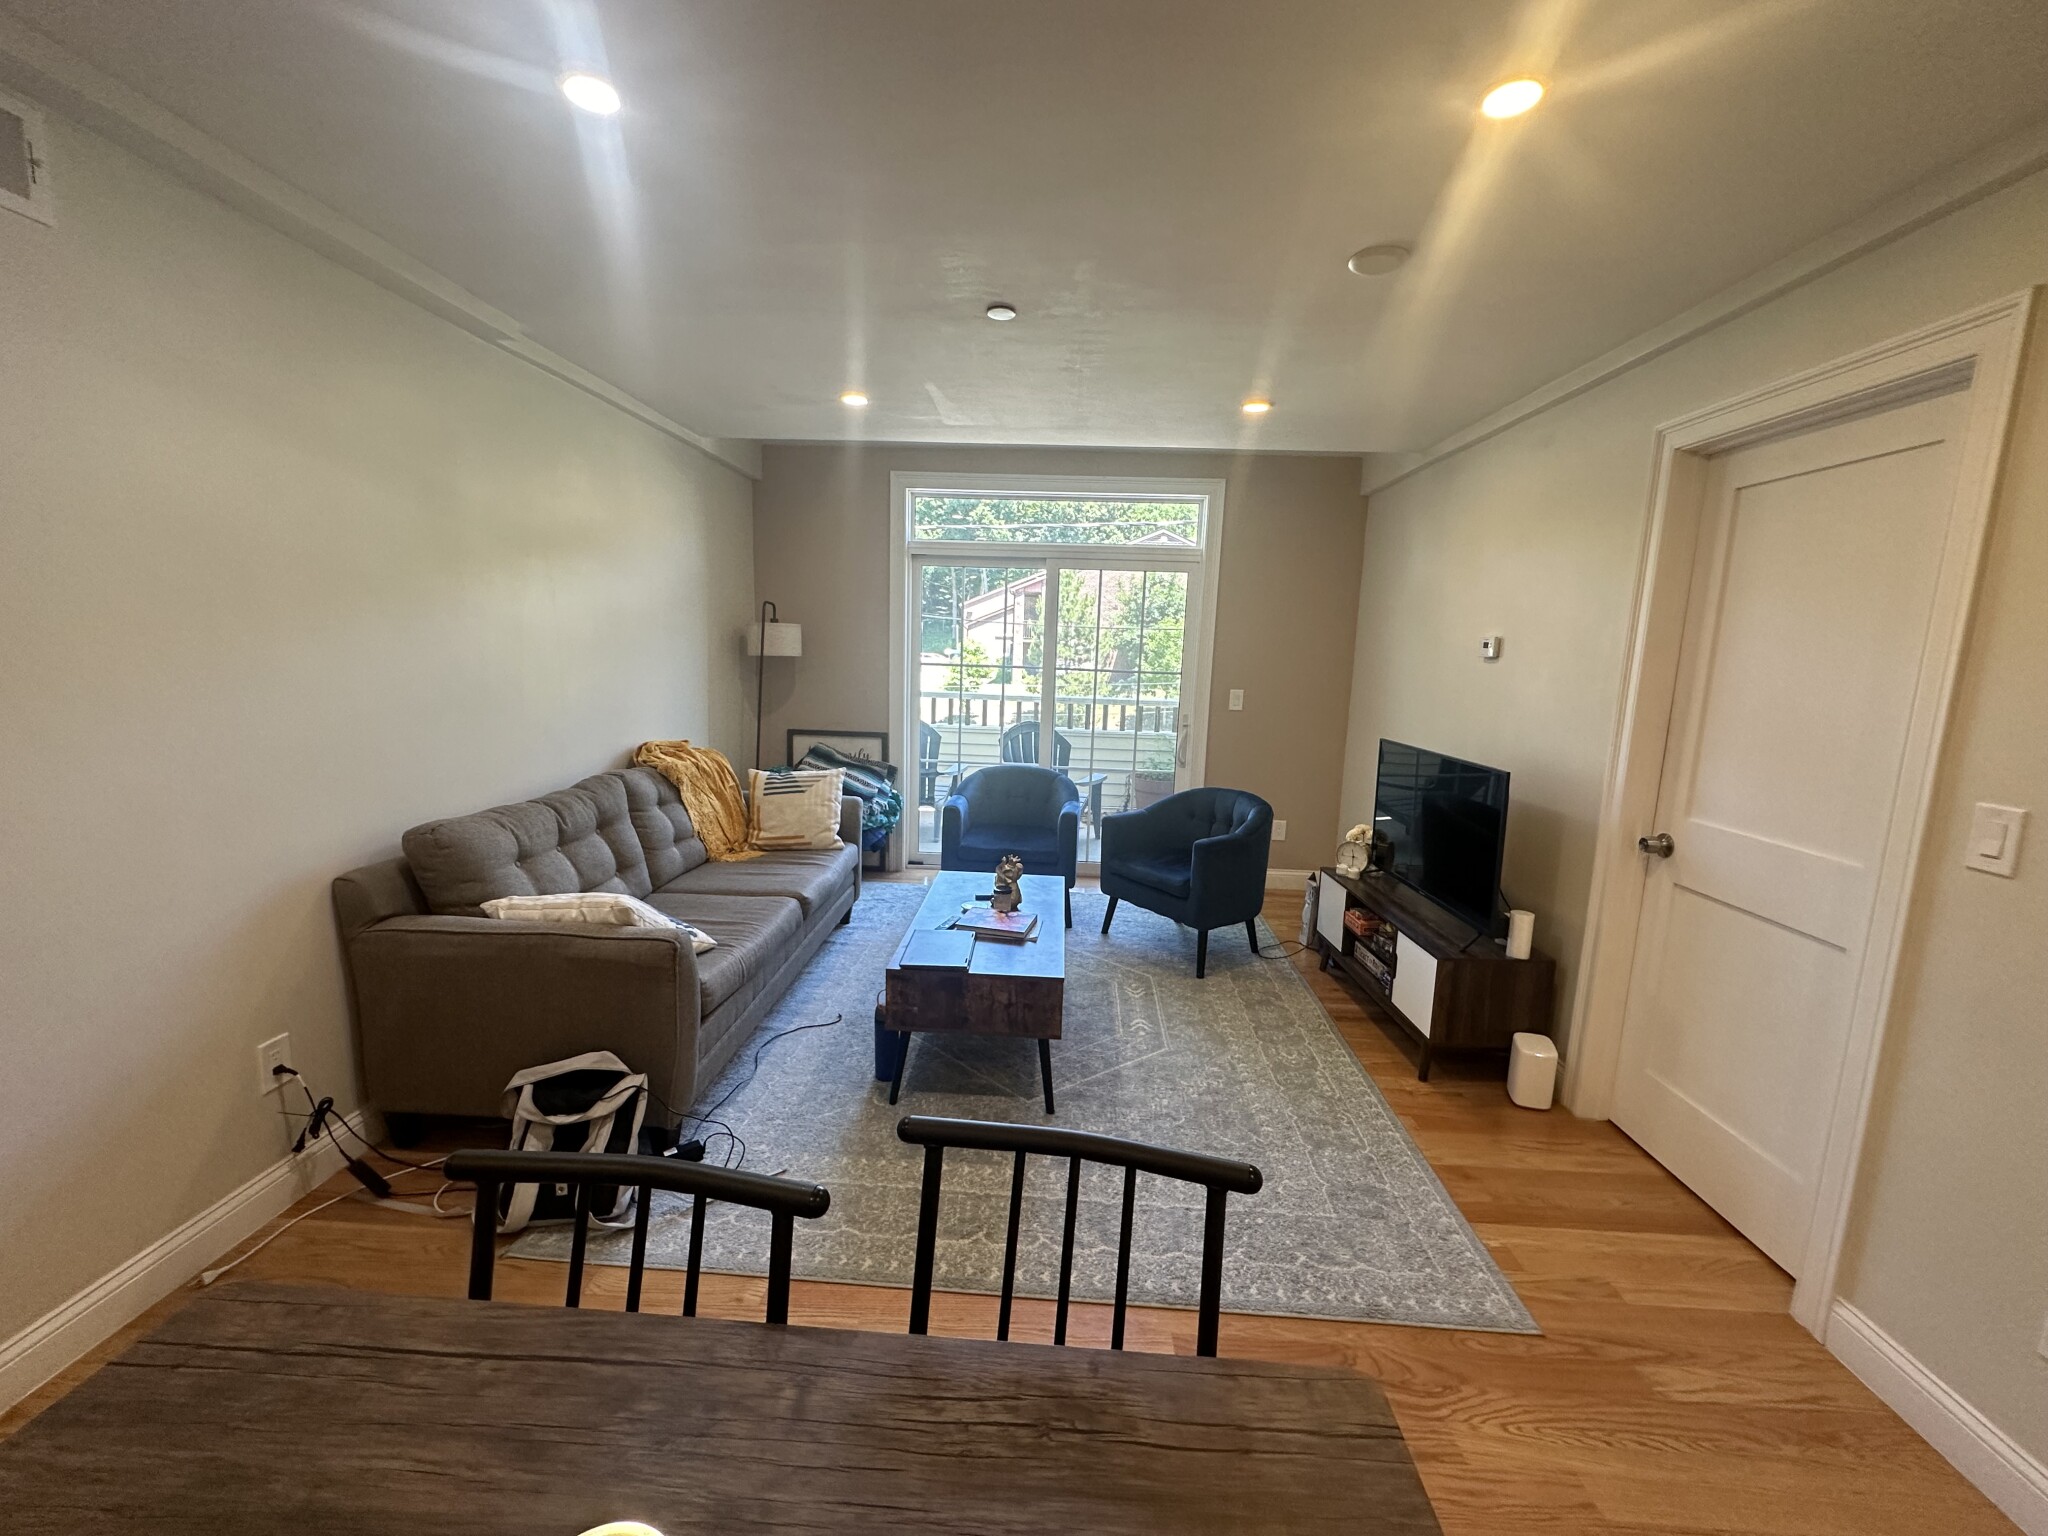 Photos of apartment on Fairfview Ave.,Belmont MA 02478